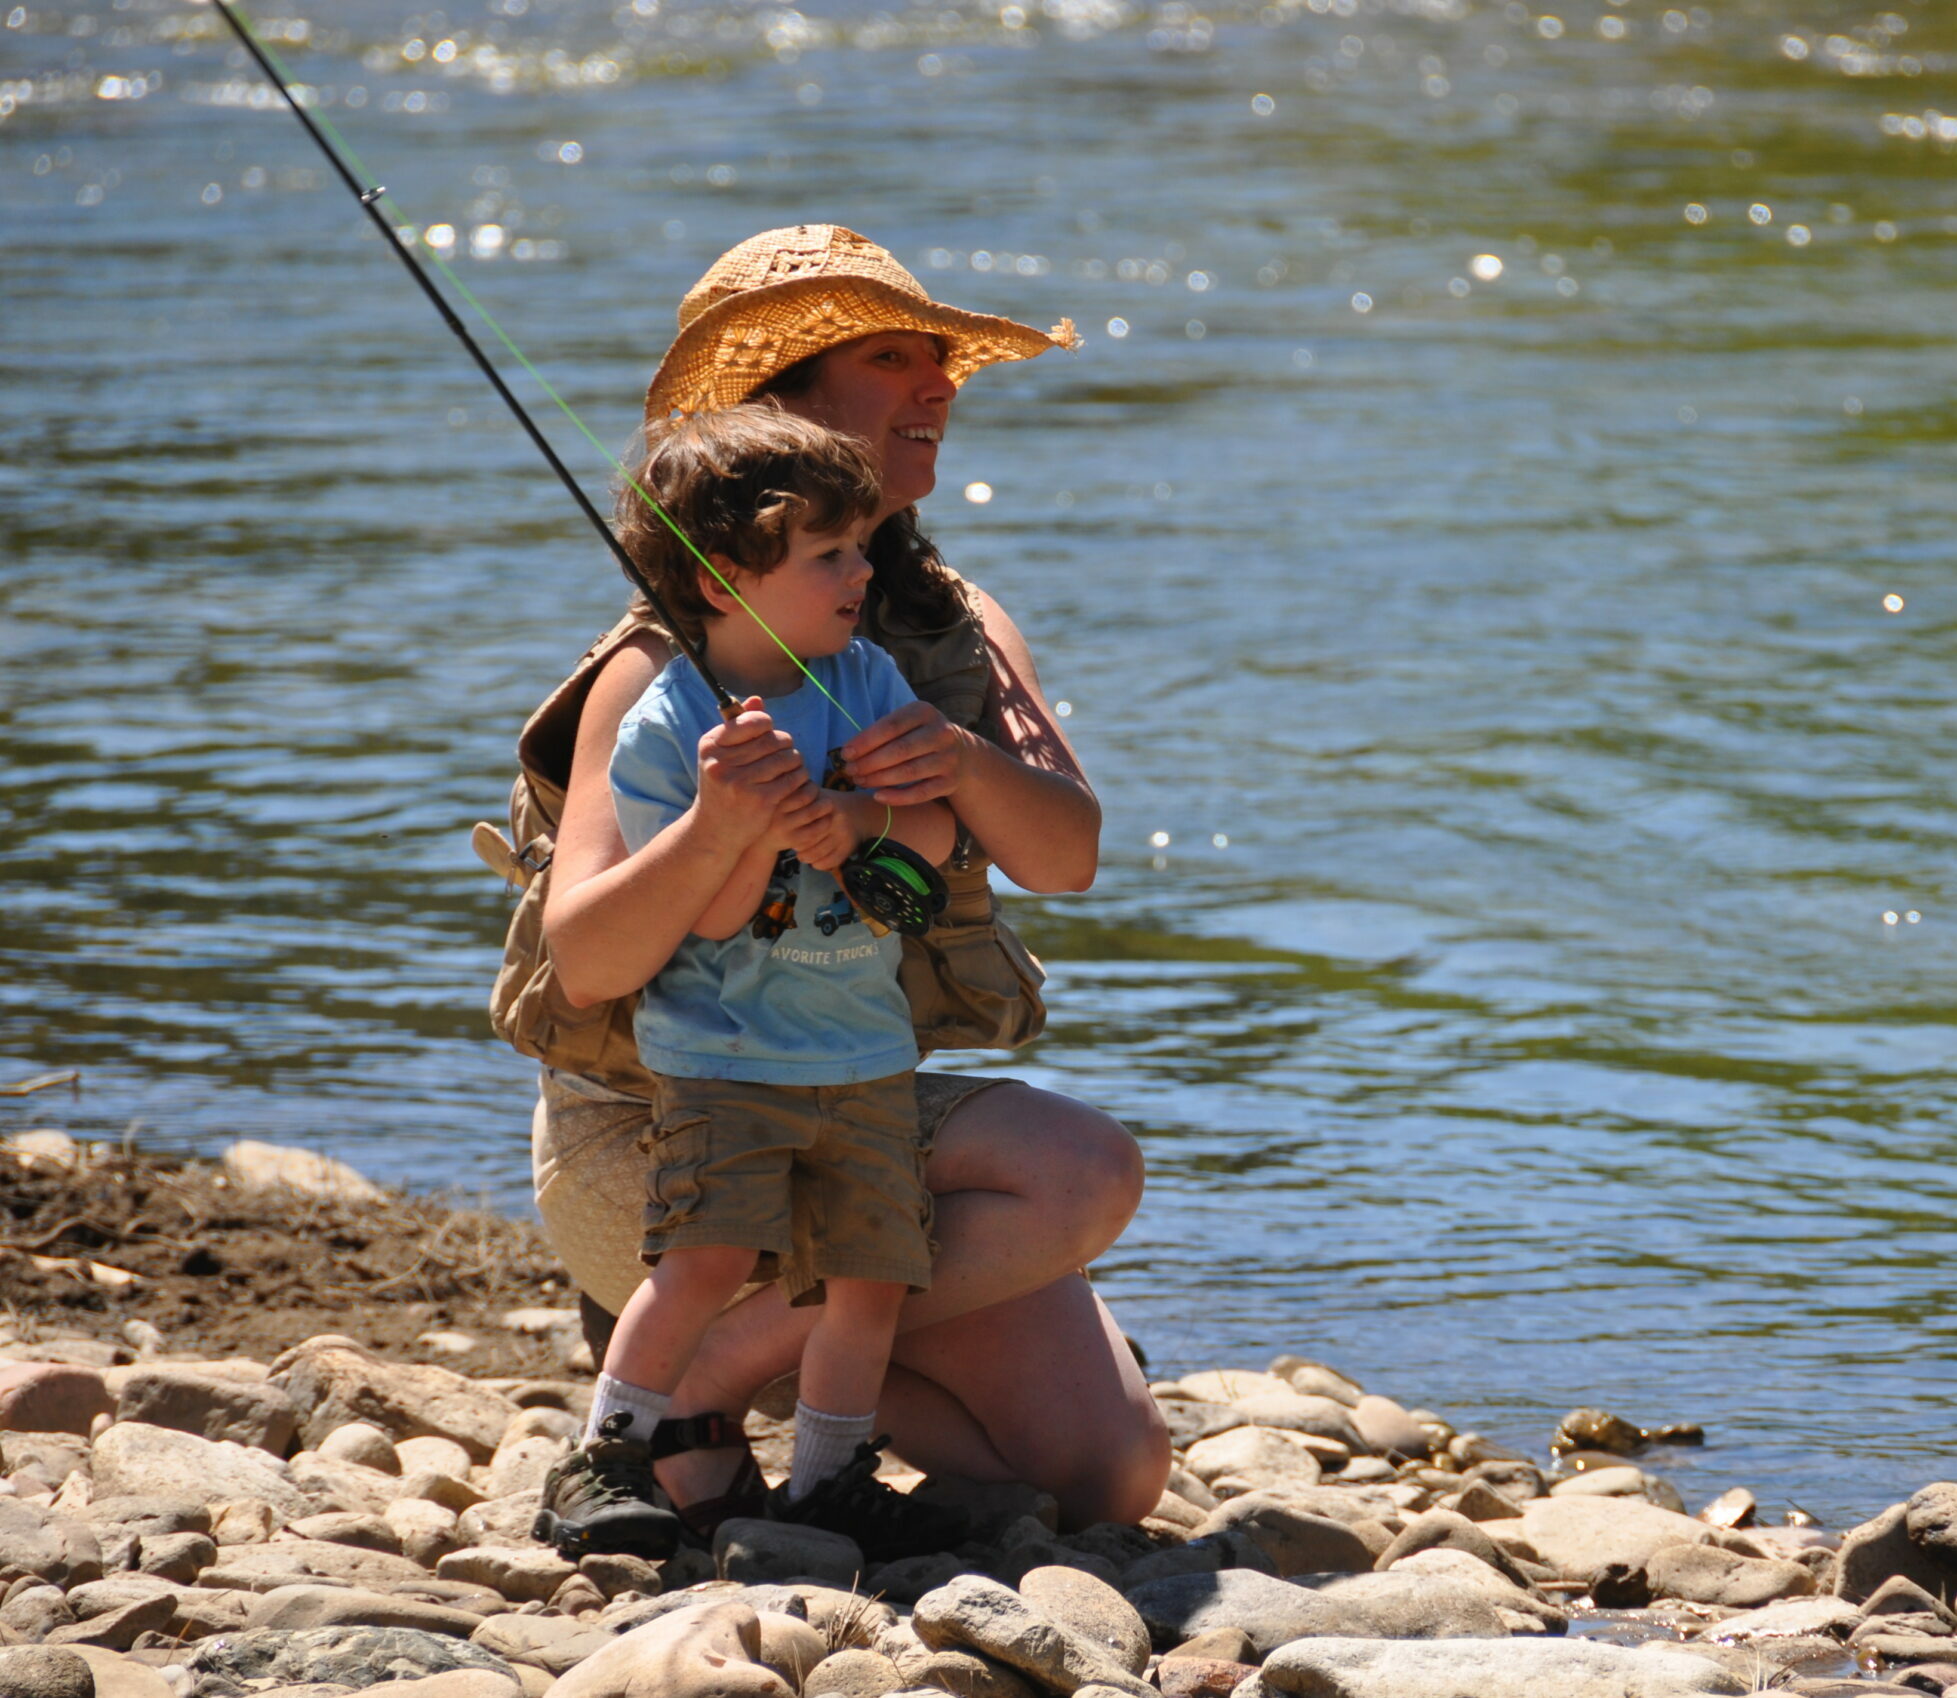 Alanah and her son enjoying our stream access laws, fishing on Belt Creek, Monarch, MT.